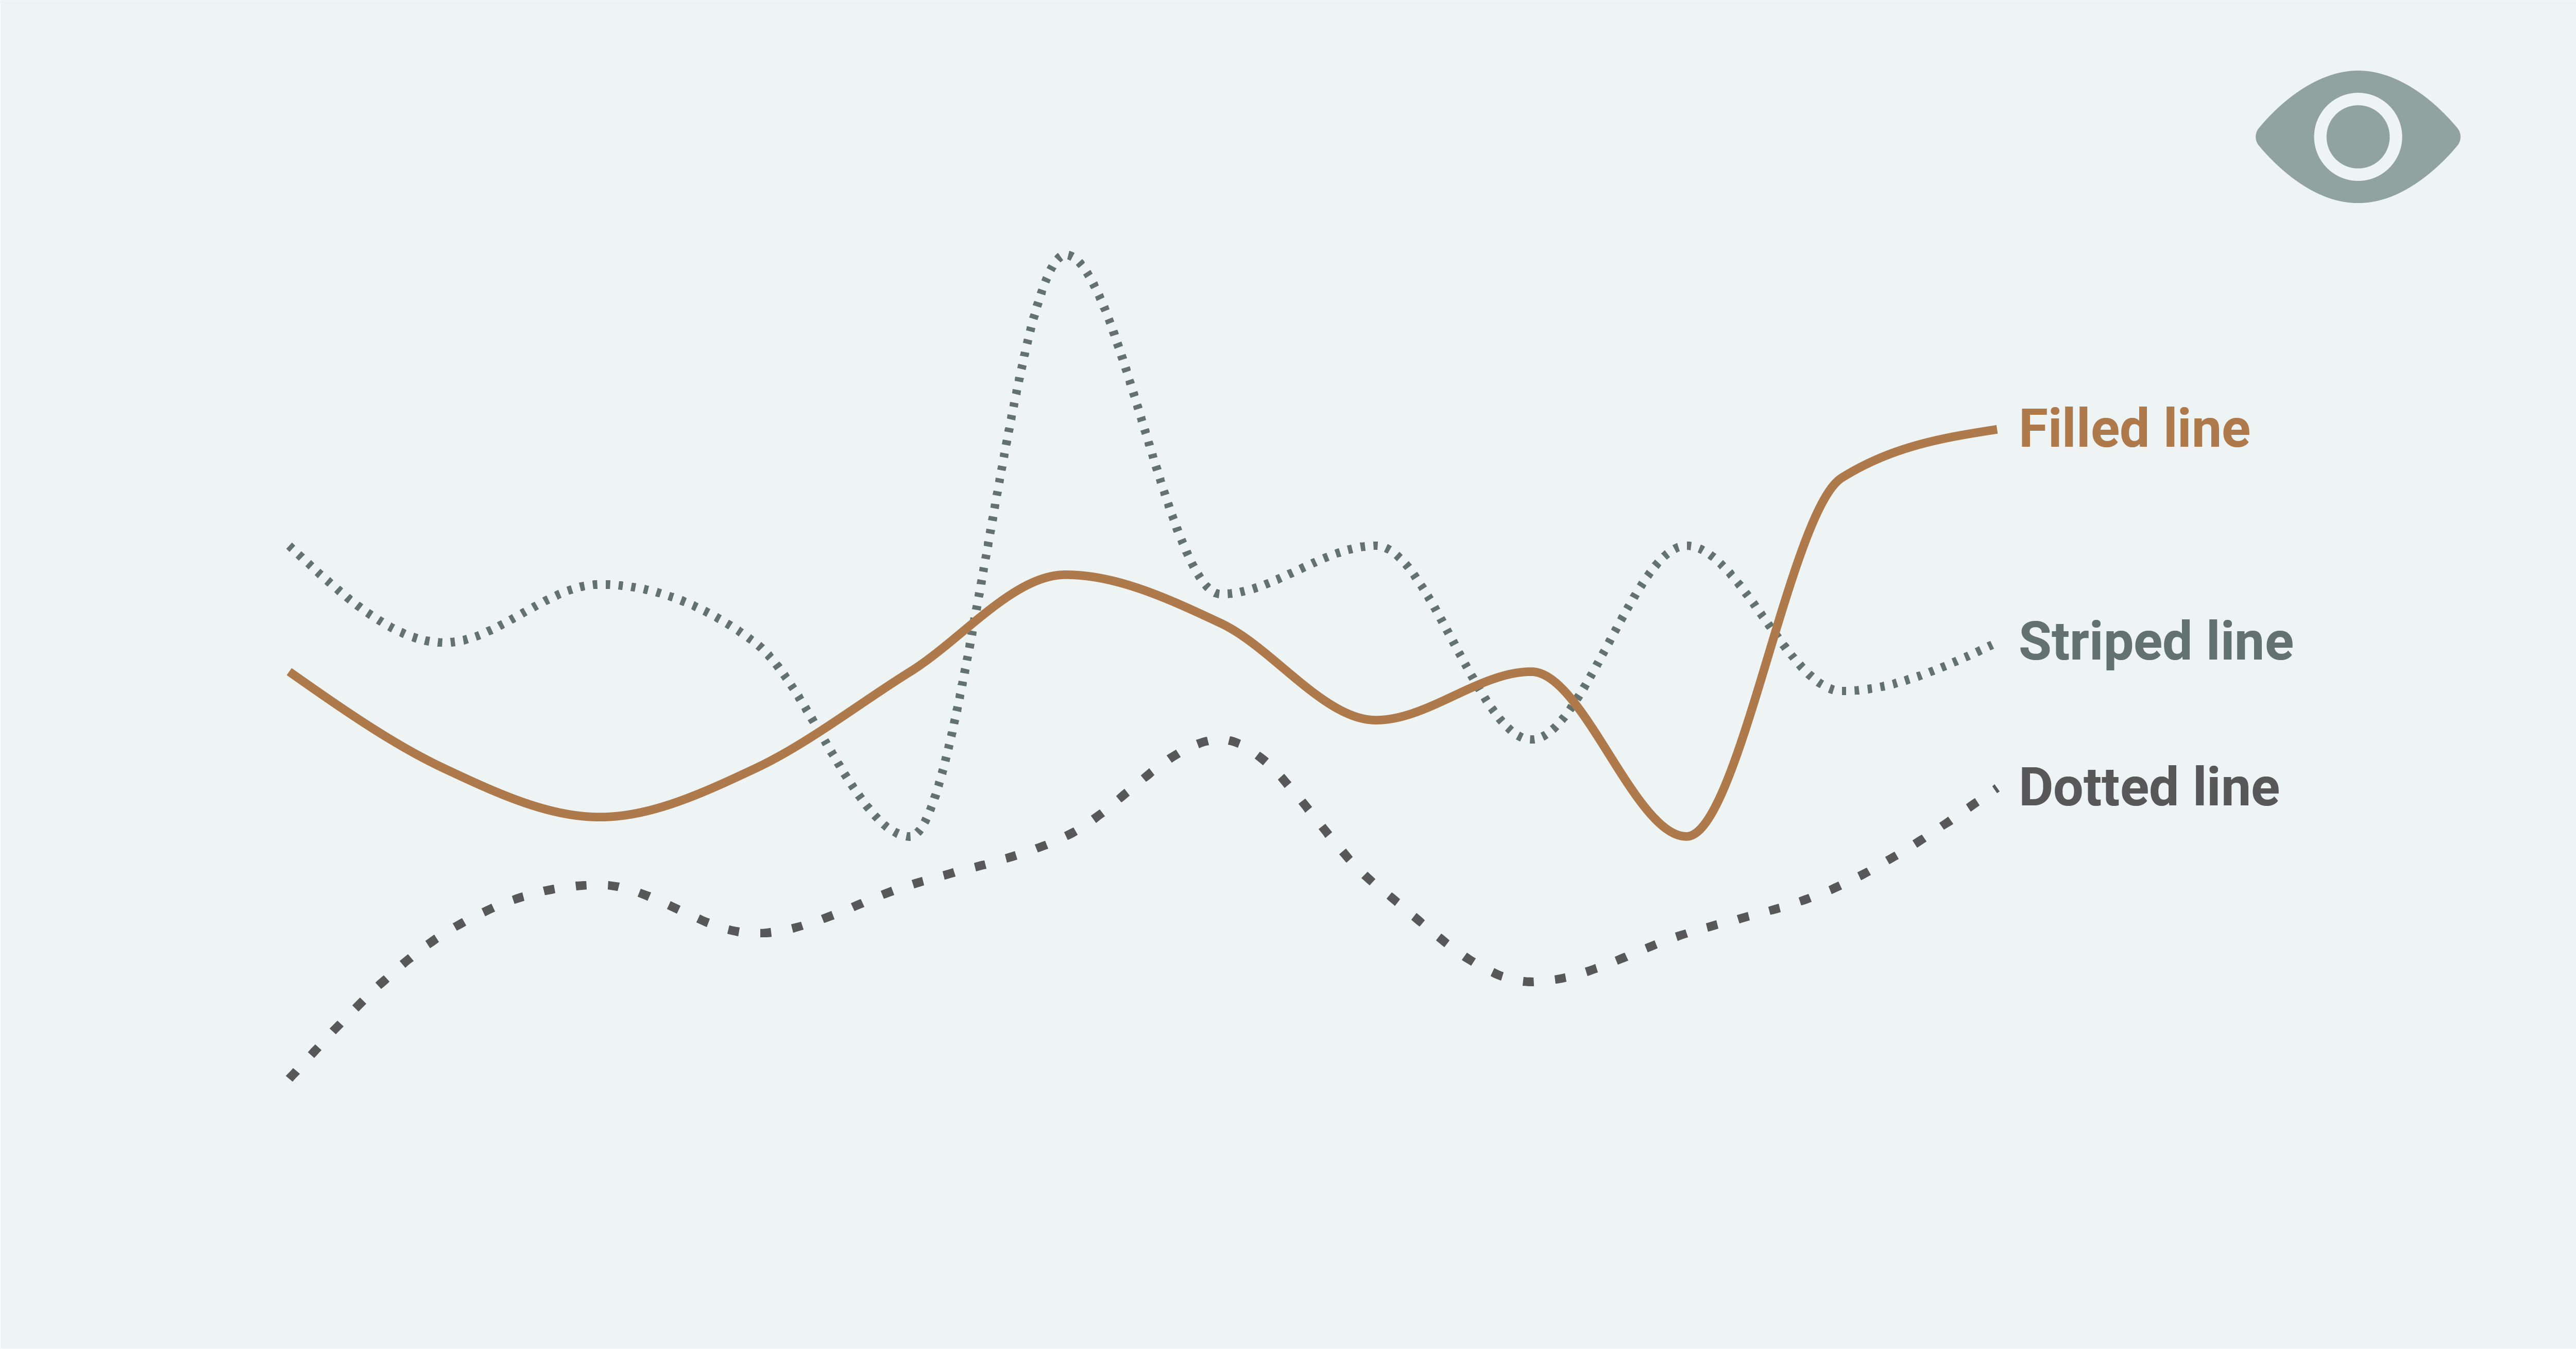 The illustration shows three lines of a line chart. The first one is orange and it is a filled line. The second line is green and it's striped. The third line is grey and it's dotted.